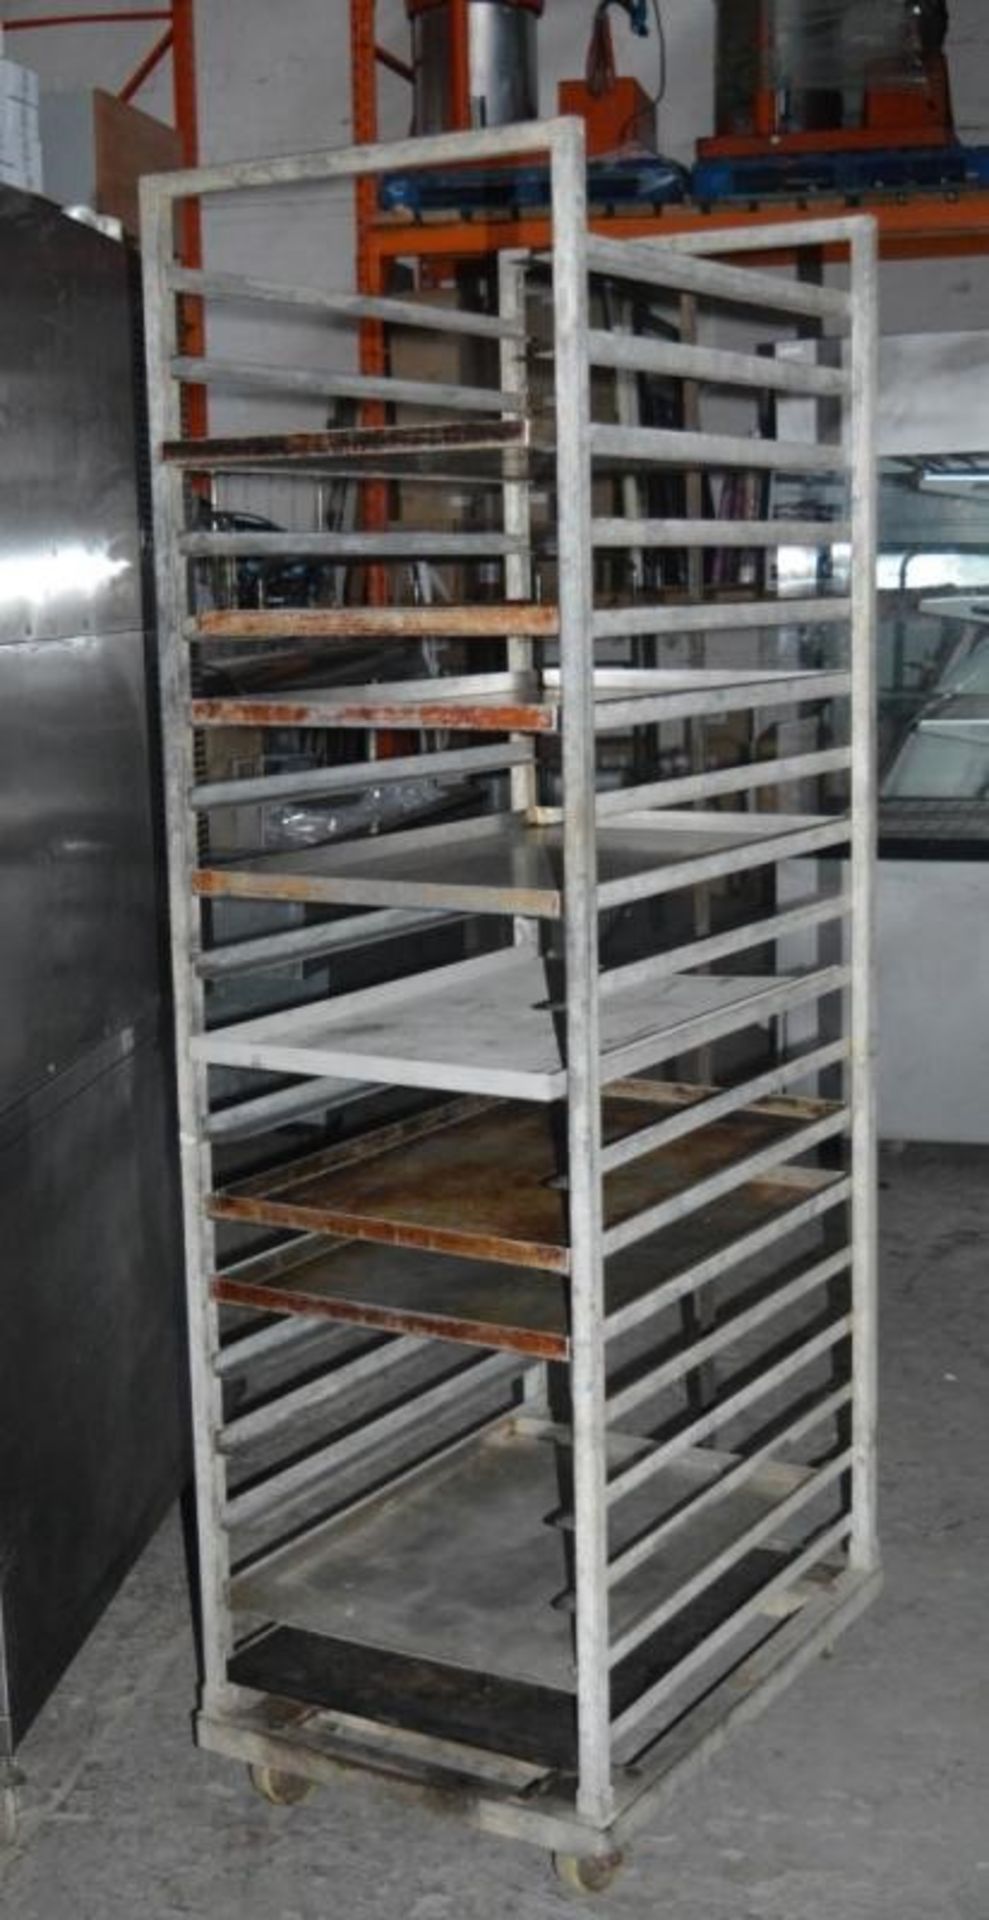 1 x Mono FG159 Double Bake Off Steam Convection Oven - Includes Ten Cooking Trays, Mobile Tray Holde - Bild 3 aus 14